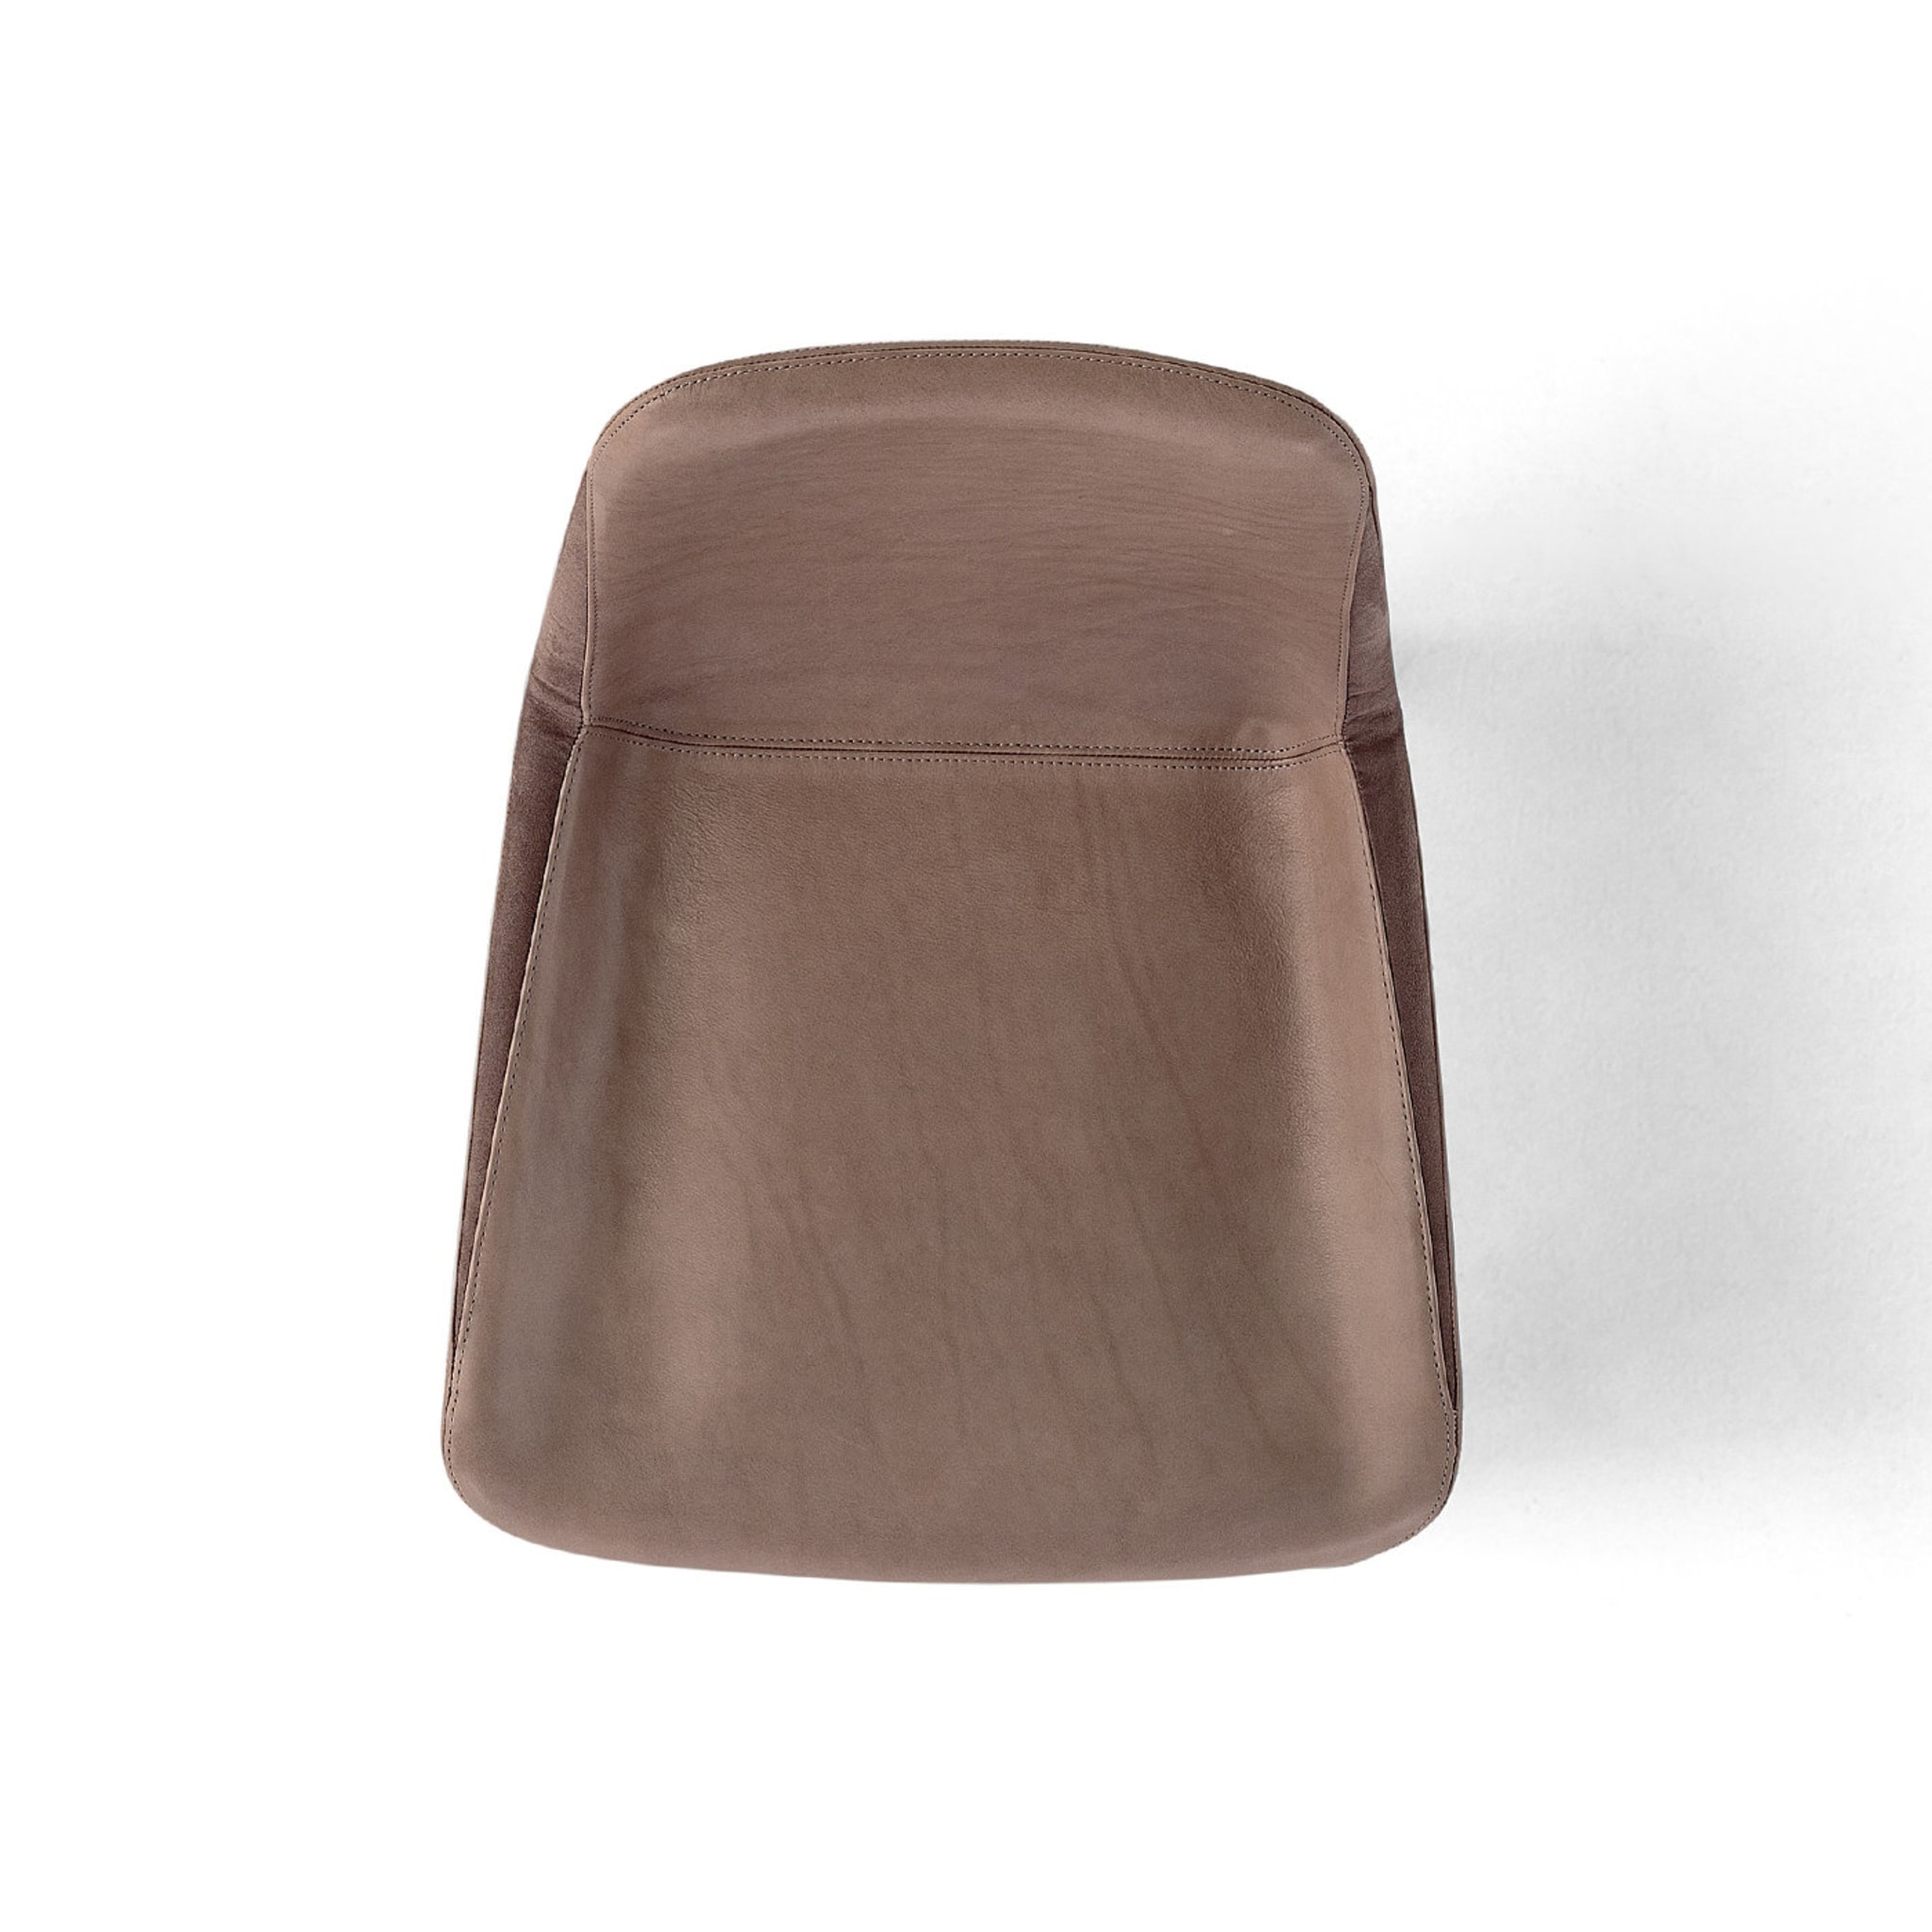 Panis Leather Chair by Anton Cristell and Emanuel Gargano - Alternative view 5